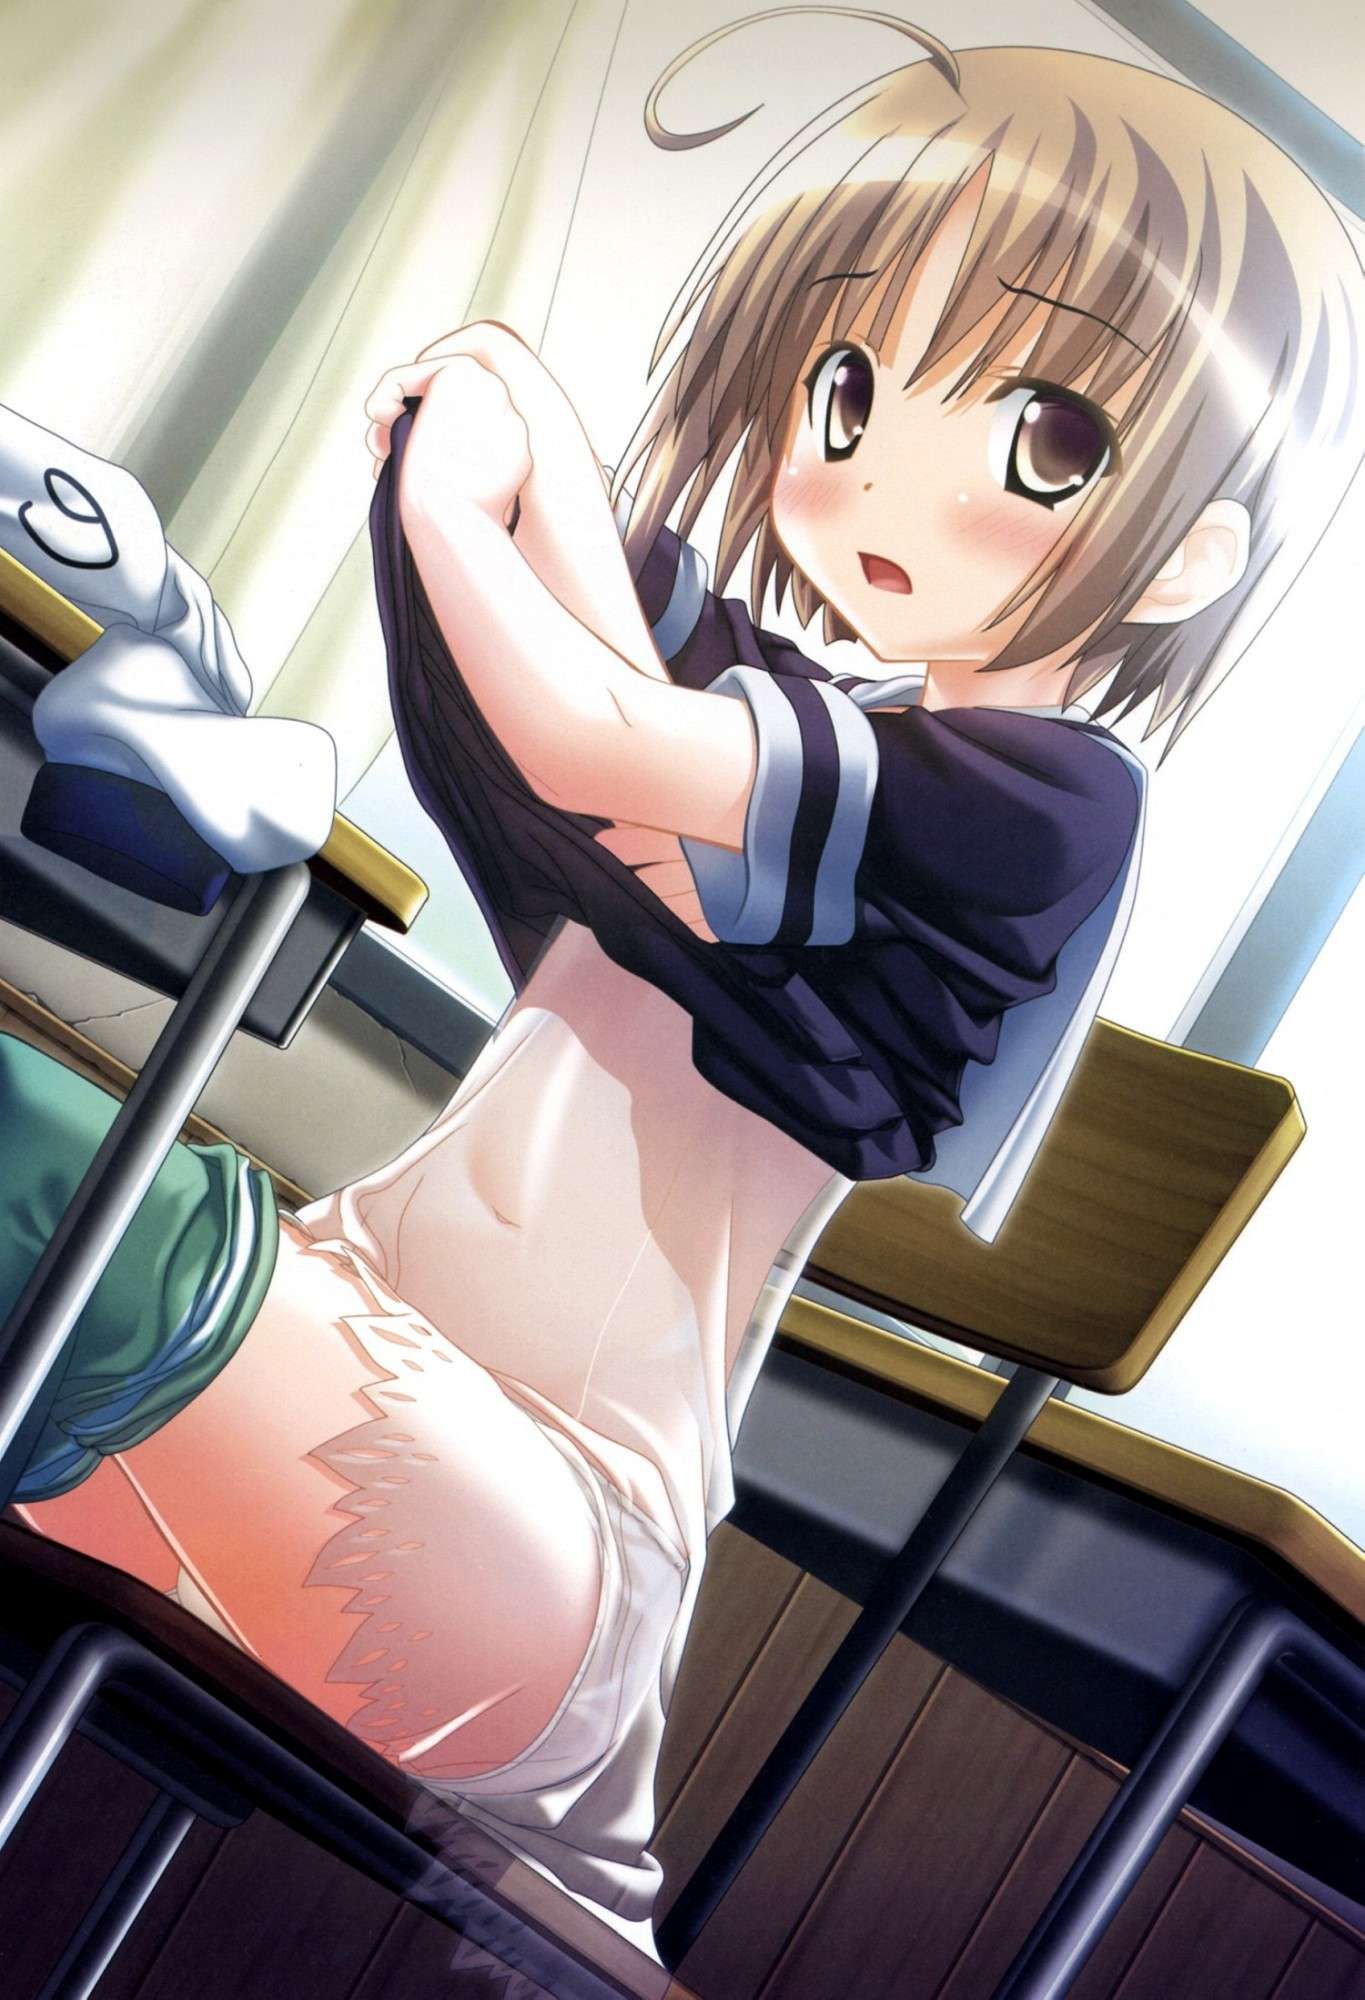 Lucky lewd image that came across a girl changing clothes please 15